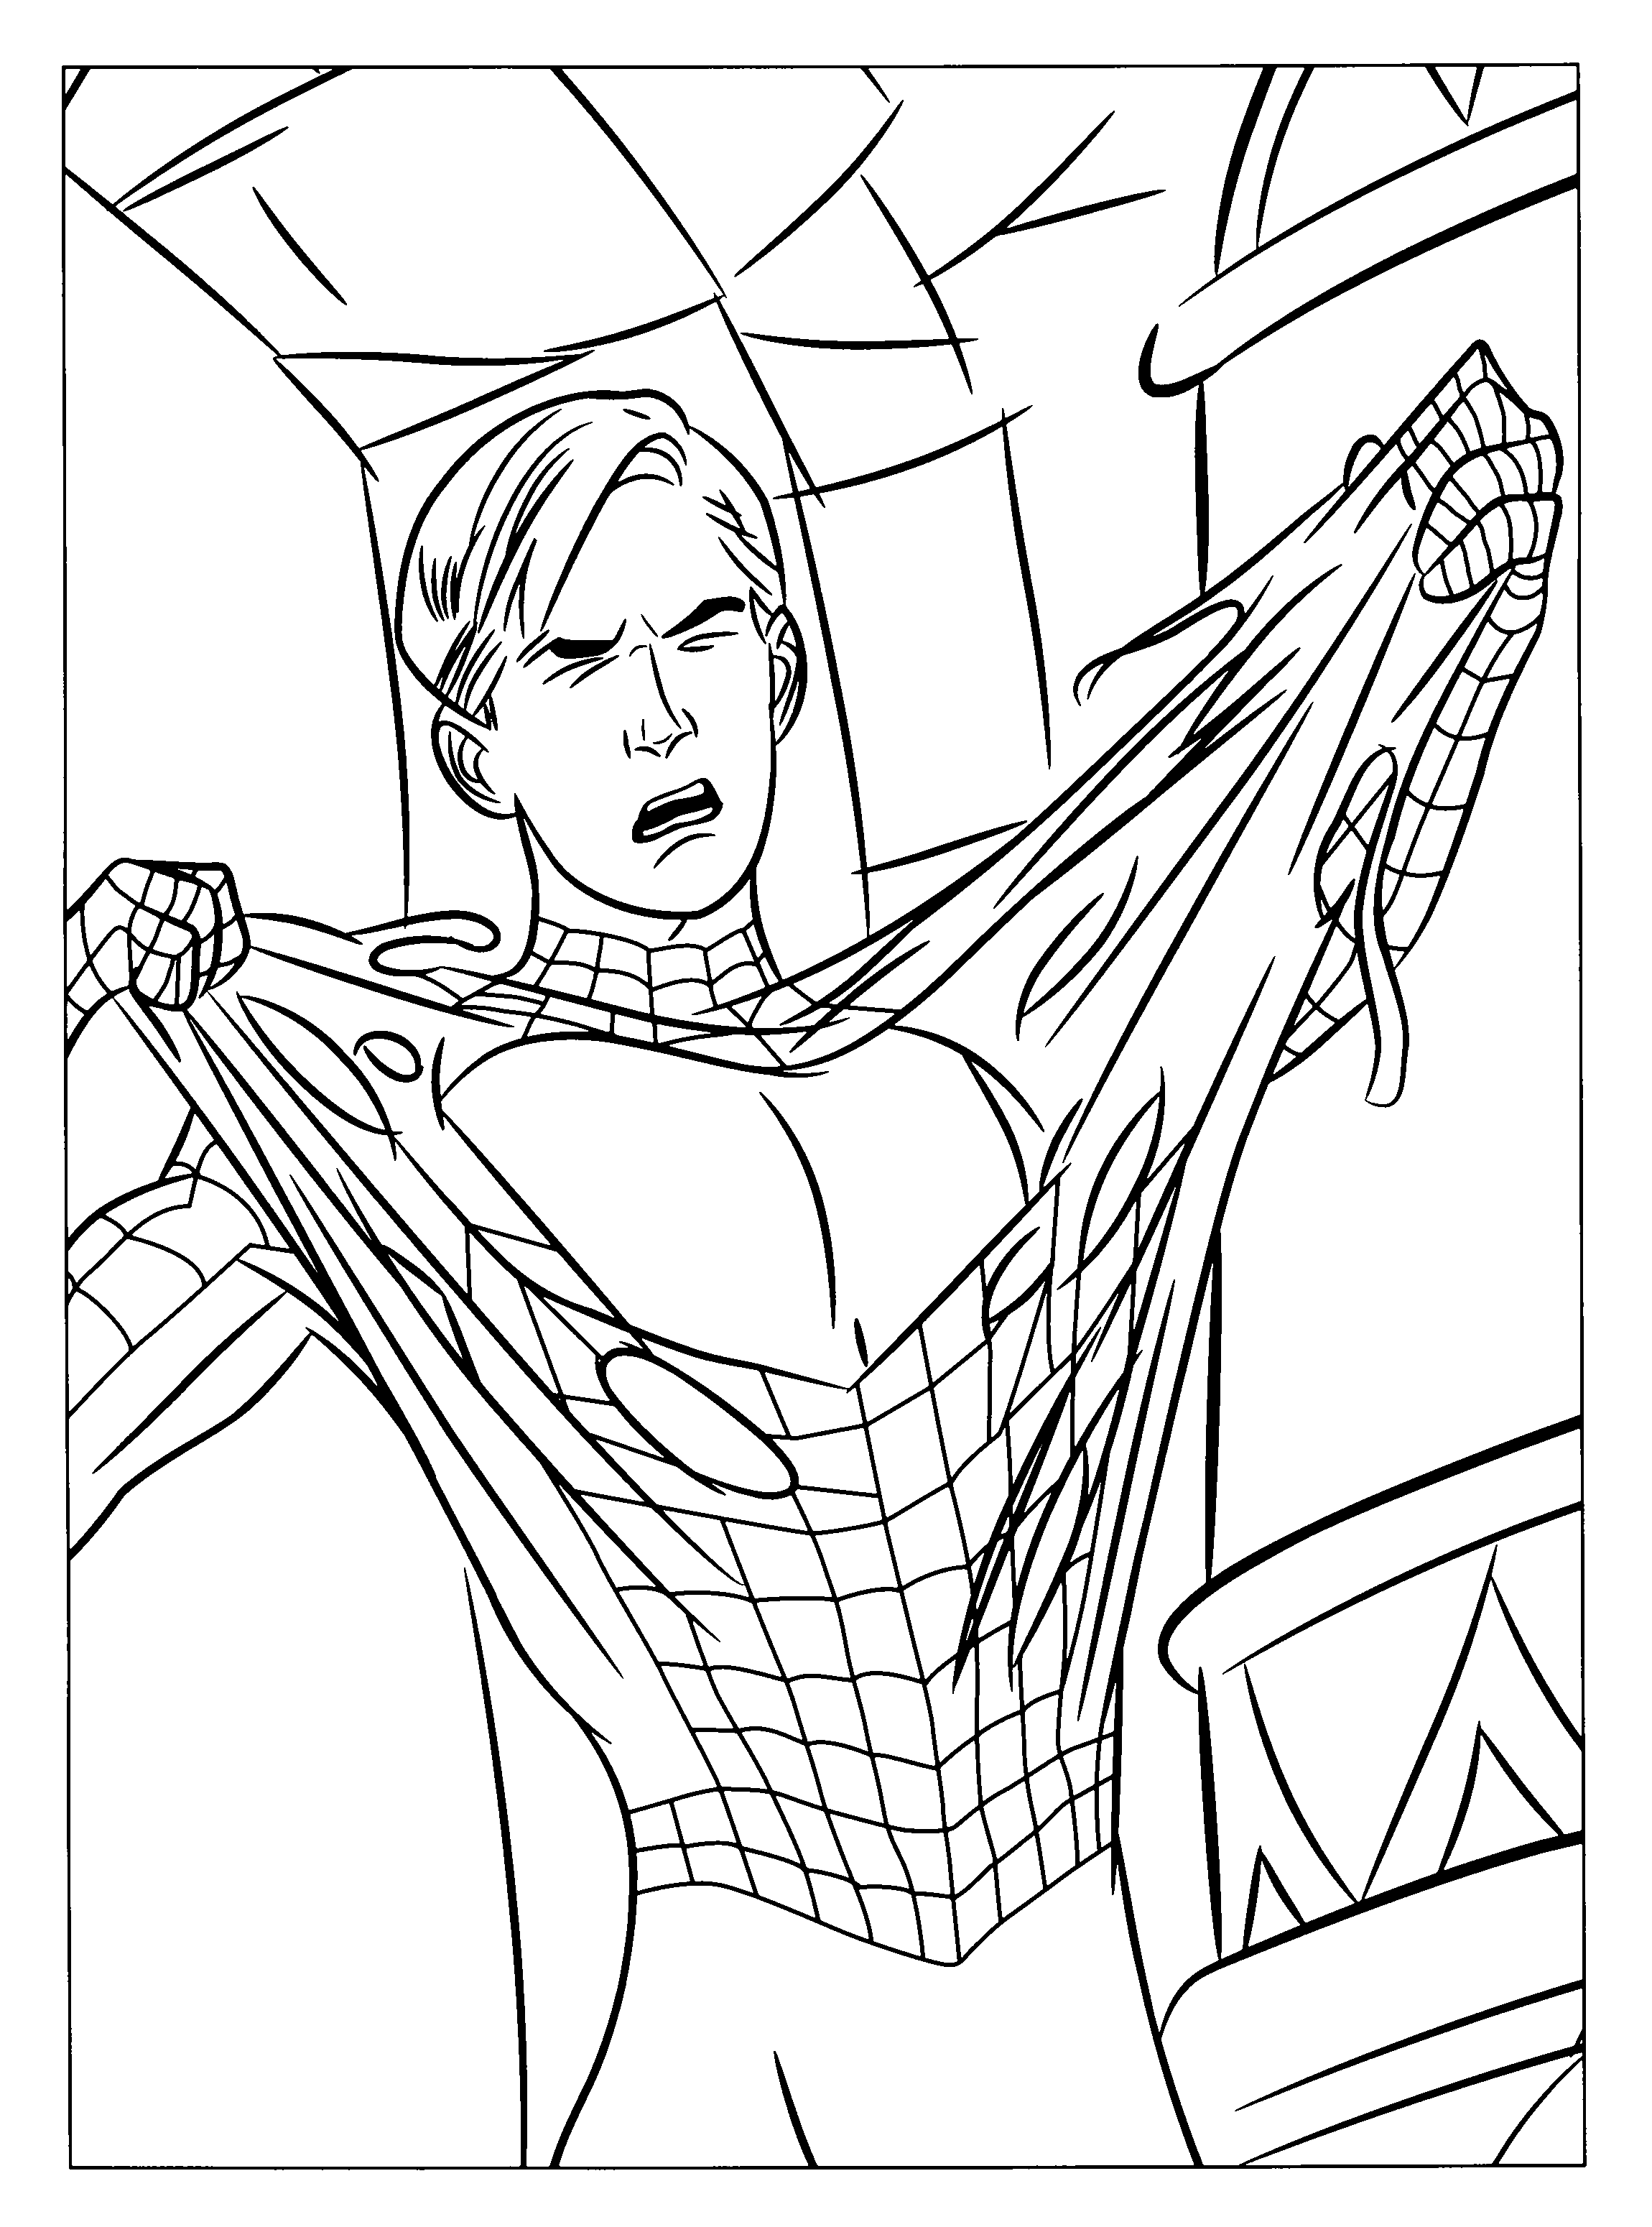 Spiderman Coloring pages | Kids coloring pages | Free coloring pages | #3